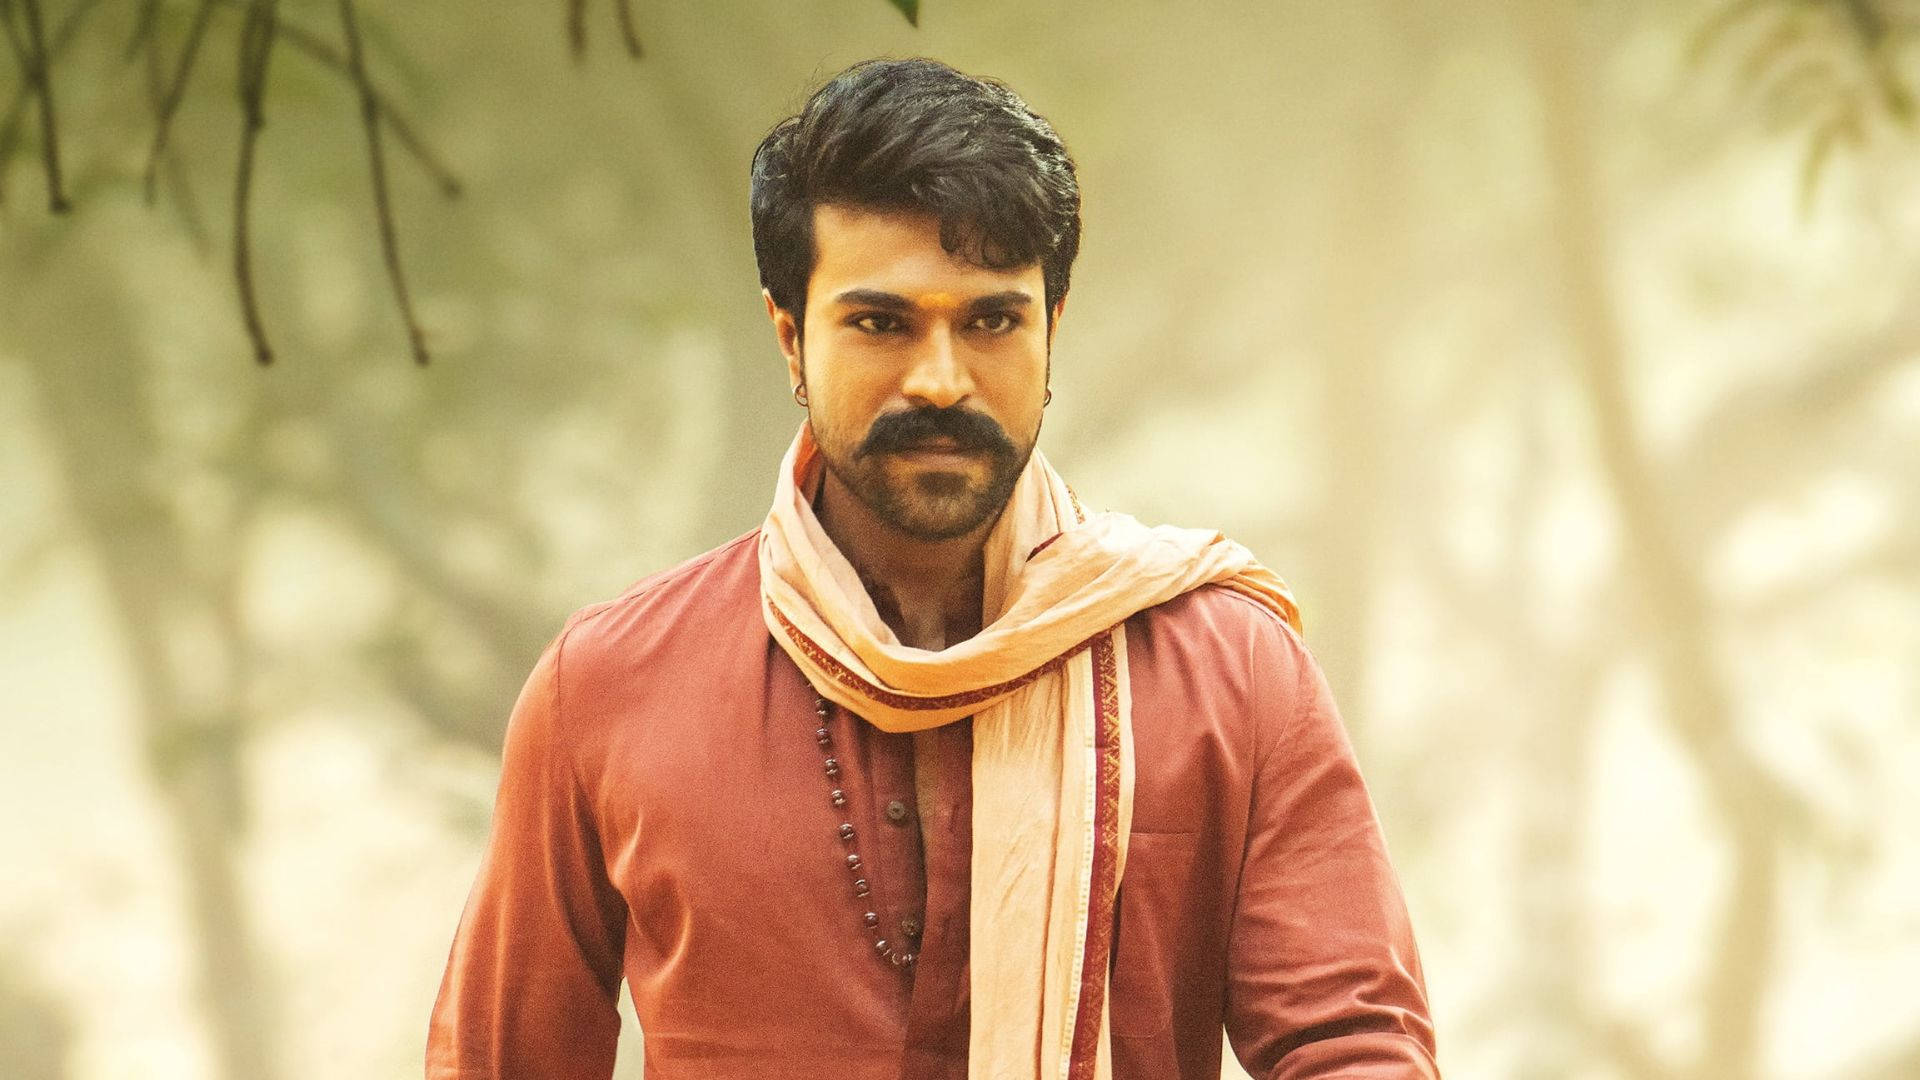 Download Ram Charan Hd In Traditional Indian Clothes Wallpaper | Wallpapers .com